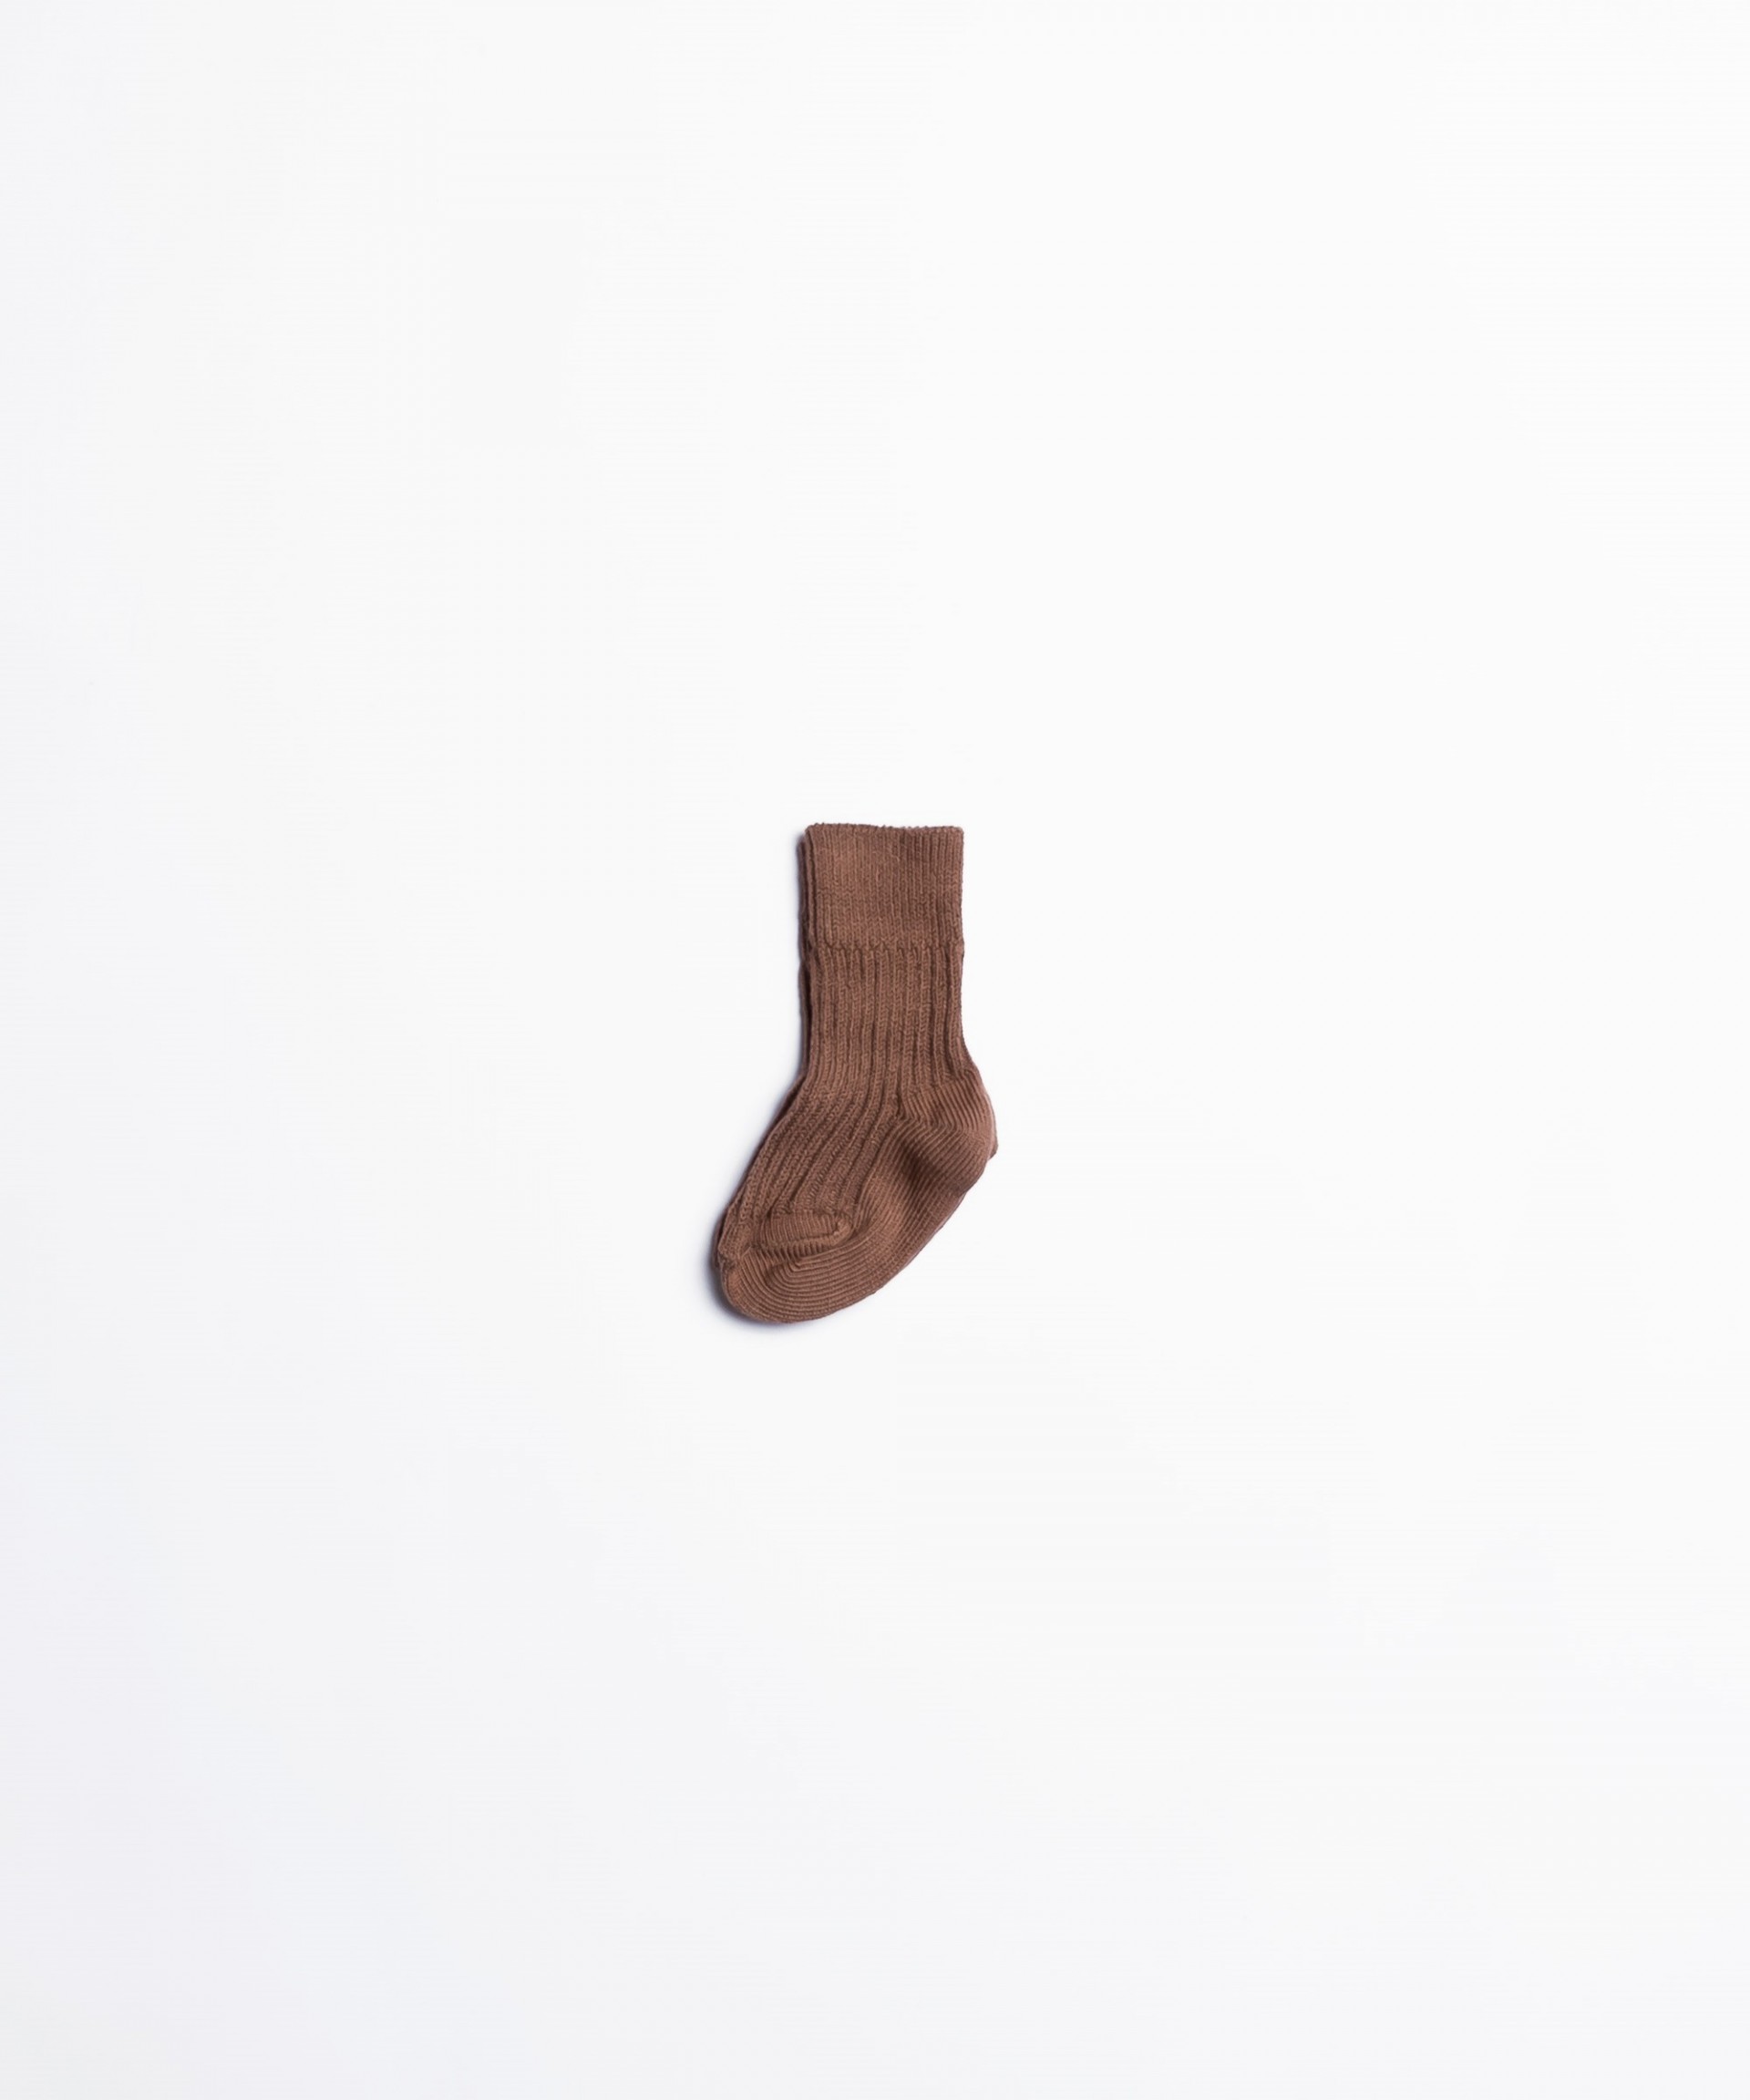 Socks with recycled fibres | Woodwork